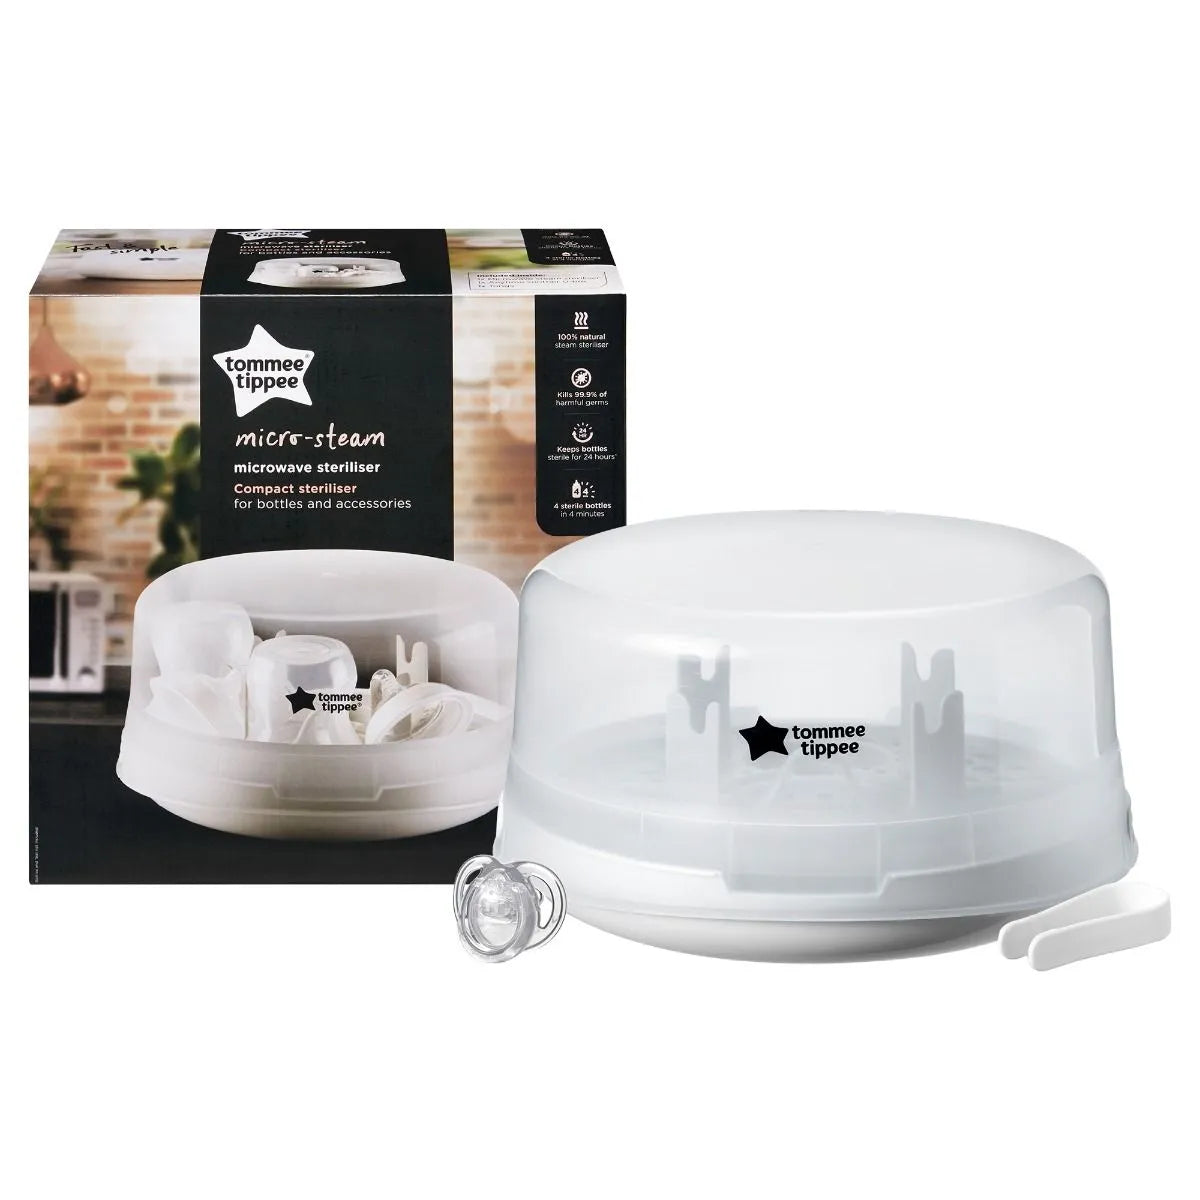 Tommee Tippee Micro Steam Sterilizer